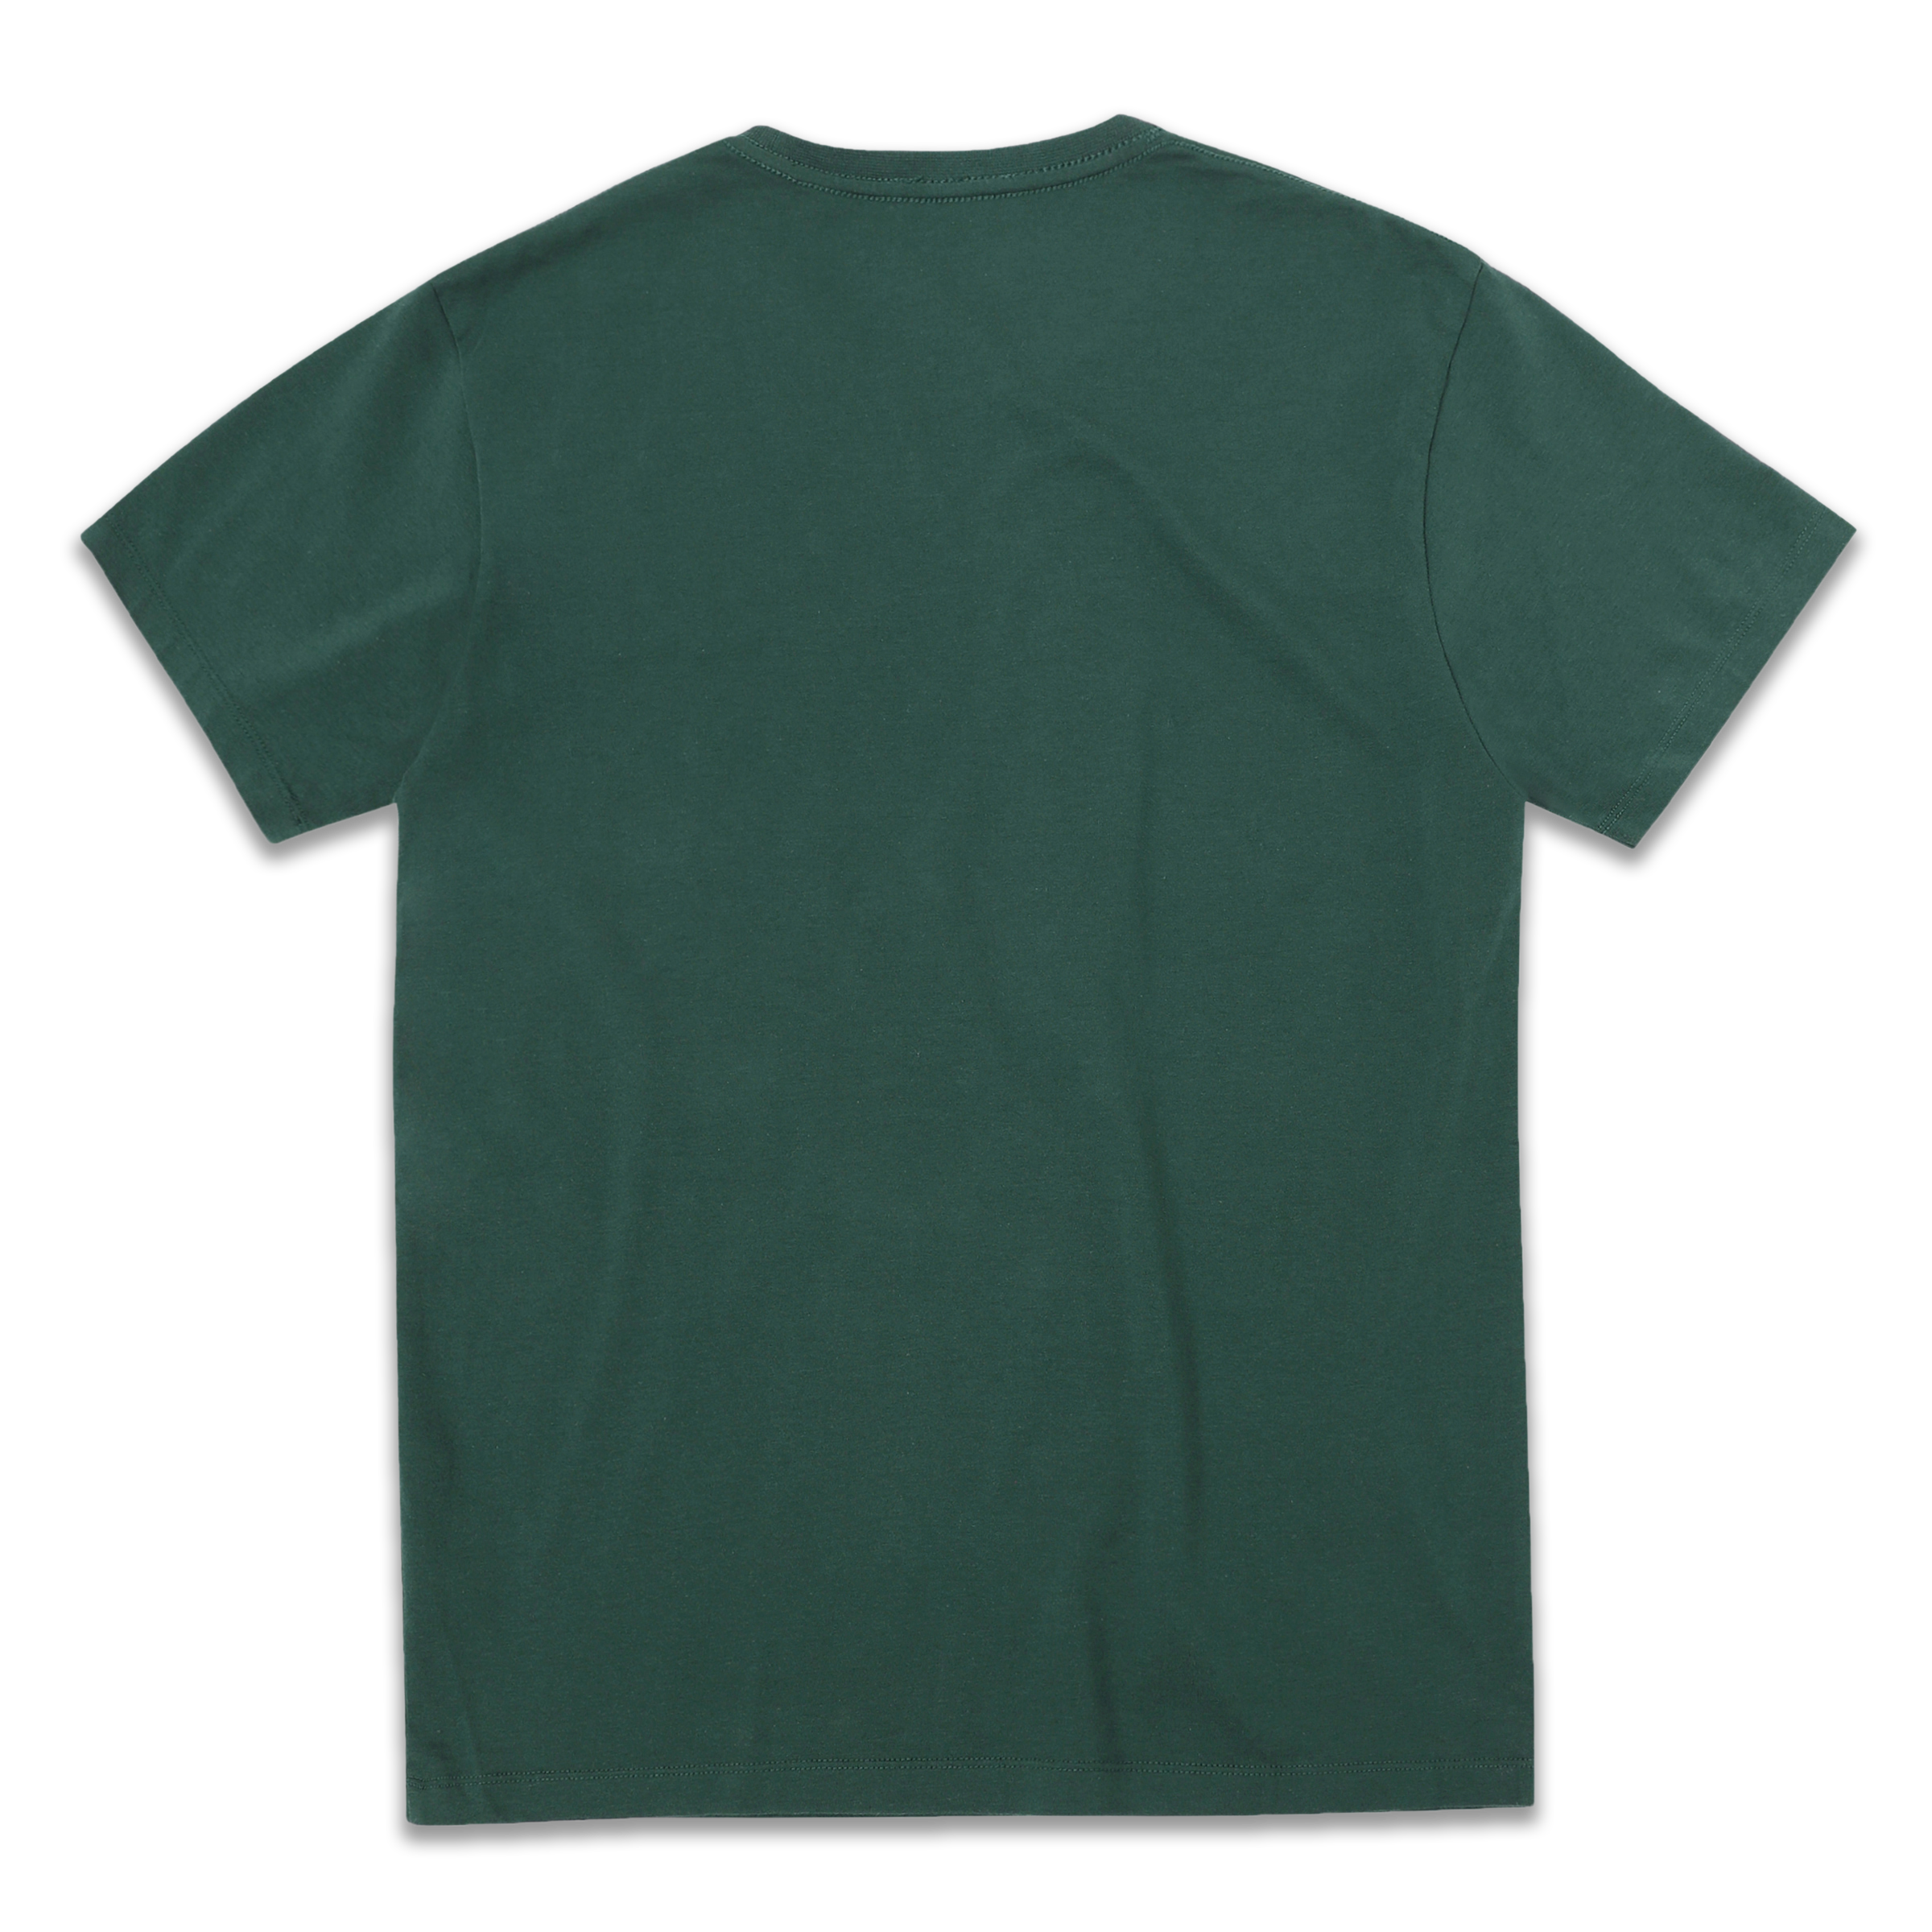 Supima Heavyweight Tee Field Green back with crewneck and short sleeves